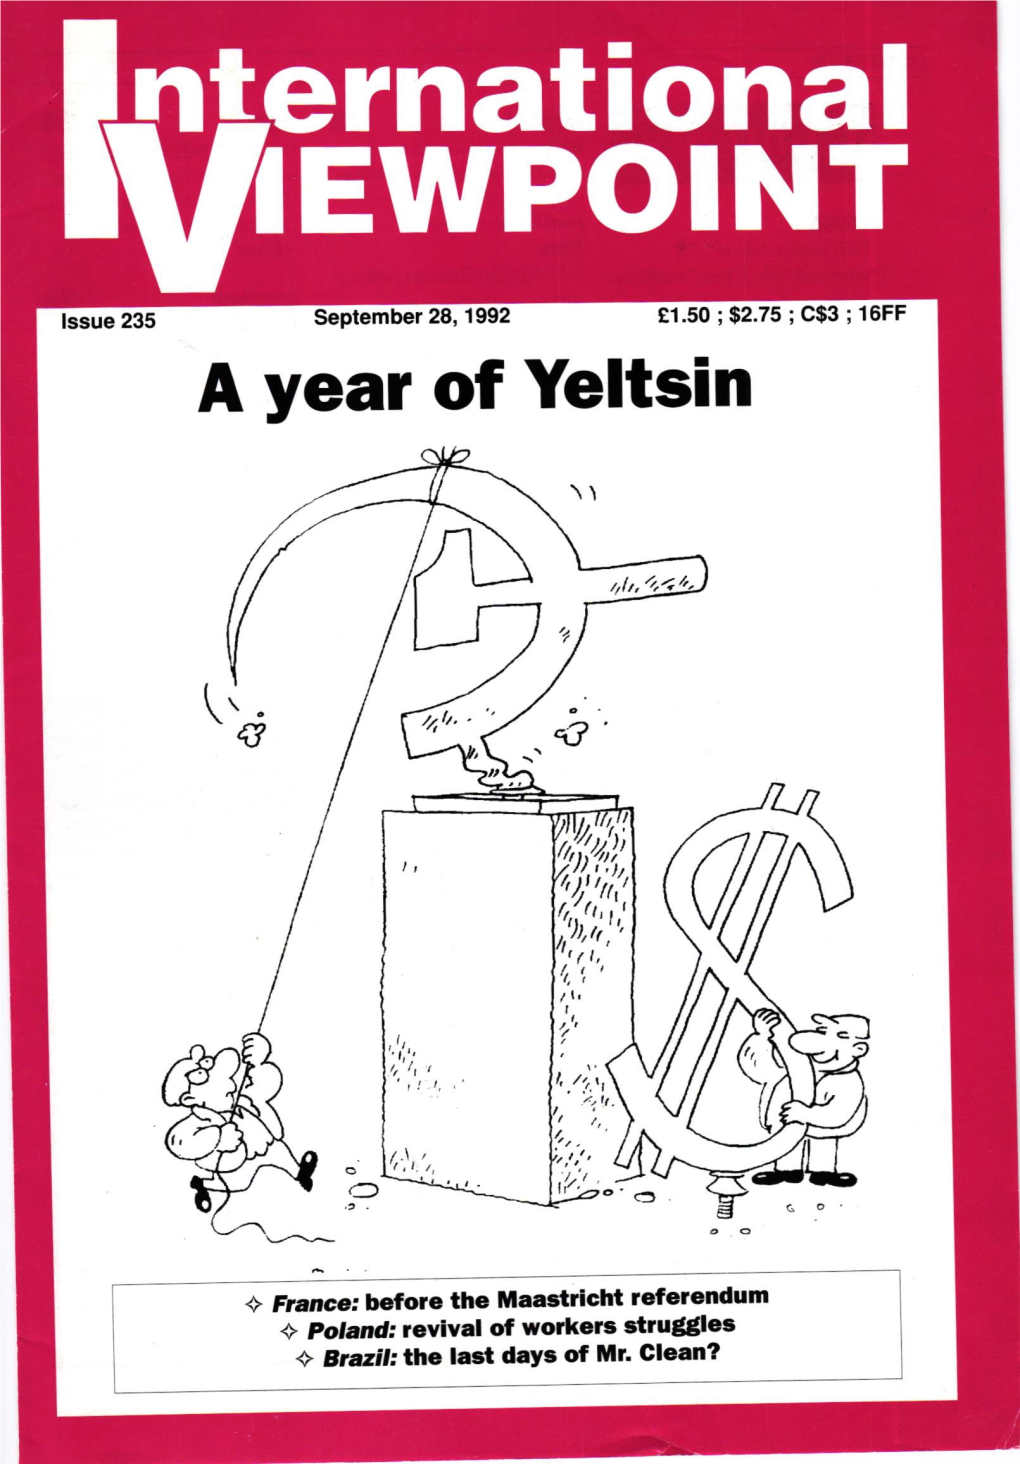 A Year of Yeltsin